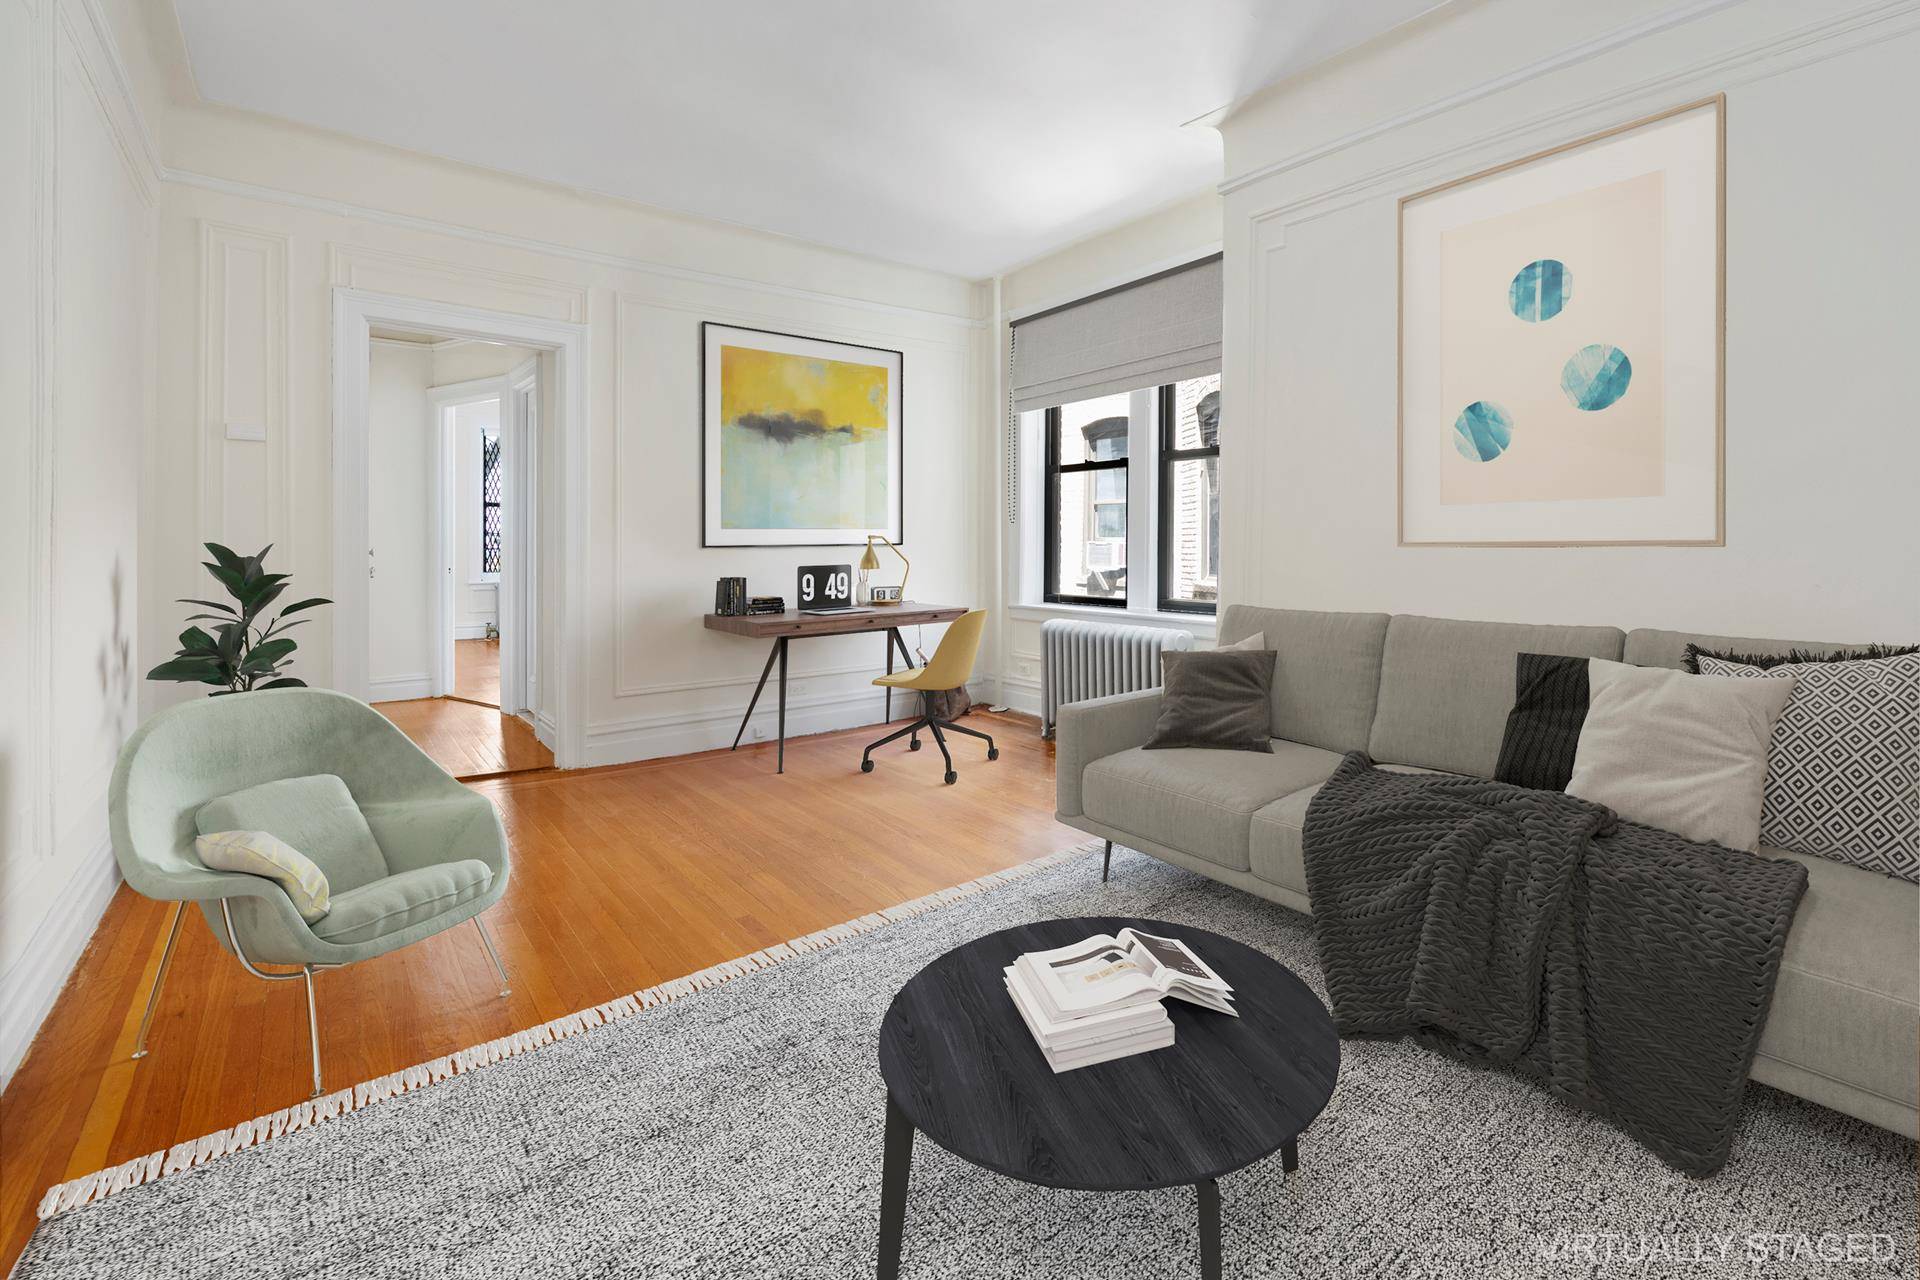 Presenting 150 Prospect Park West A beautifully restored prewar, elevator building located across from Prospect Park in the heart of Park Slope.